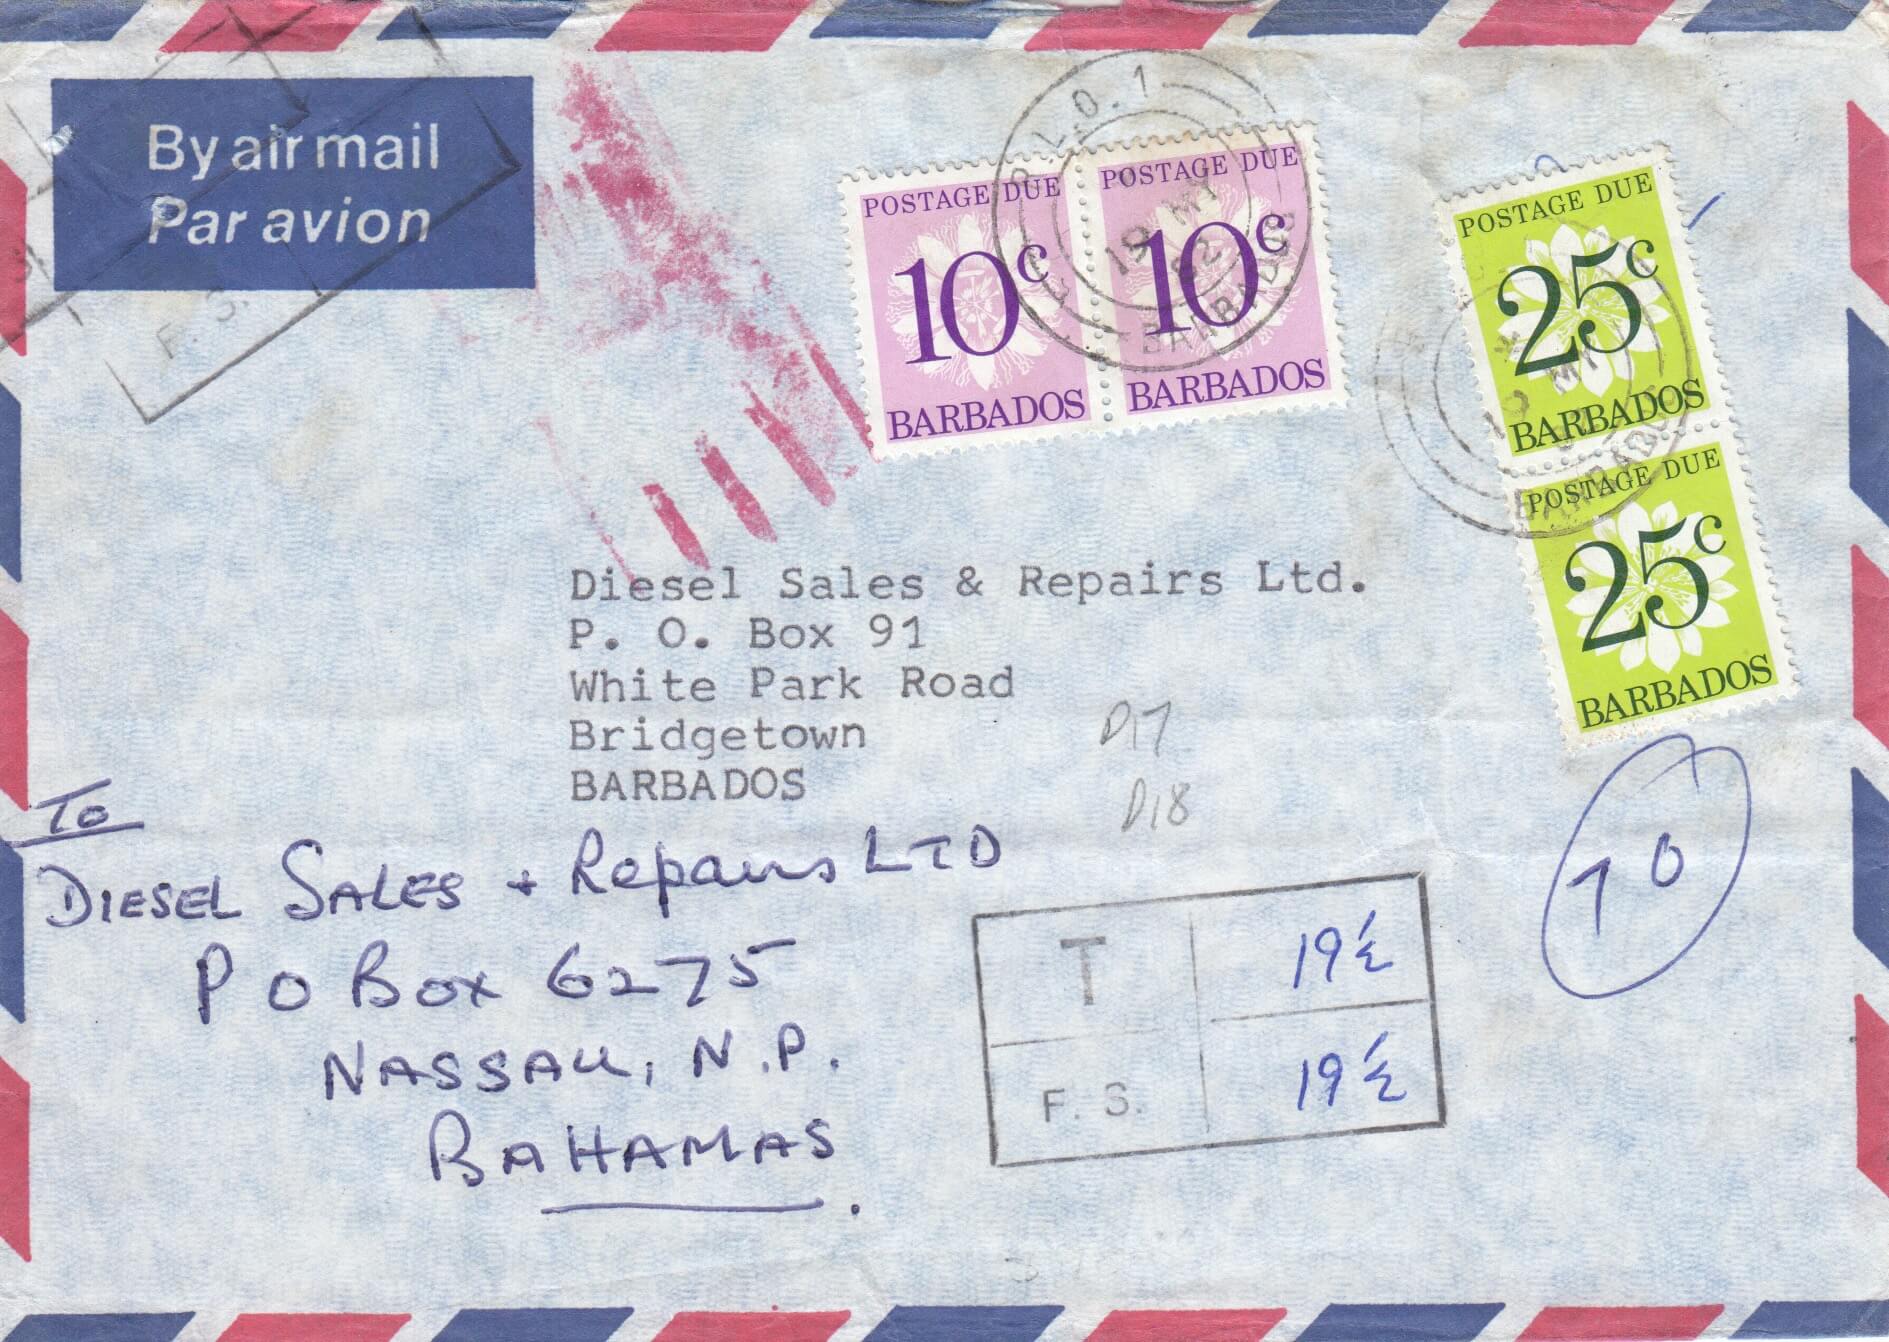 Barbados incoming unstamped airmail cover sent to Diesel Sales & Repairs Ltd, White Park Road, Bridgetown, with R.L.O. 1 cancel over postage due stamps 19th May 1982. Charged 70c Postage Due comprising 2 x 10c (SGD17) and 2 x 25c (SGD18), both in pairs. Cover forwarded to Nassau, Bahamas